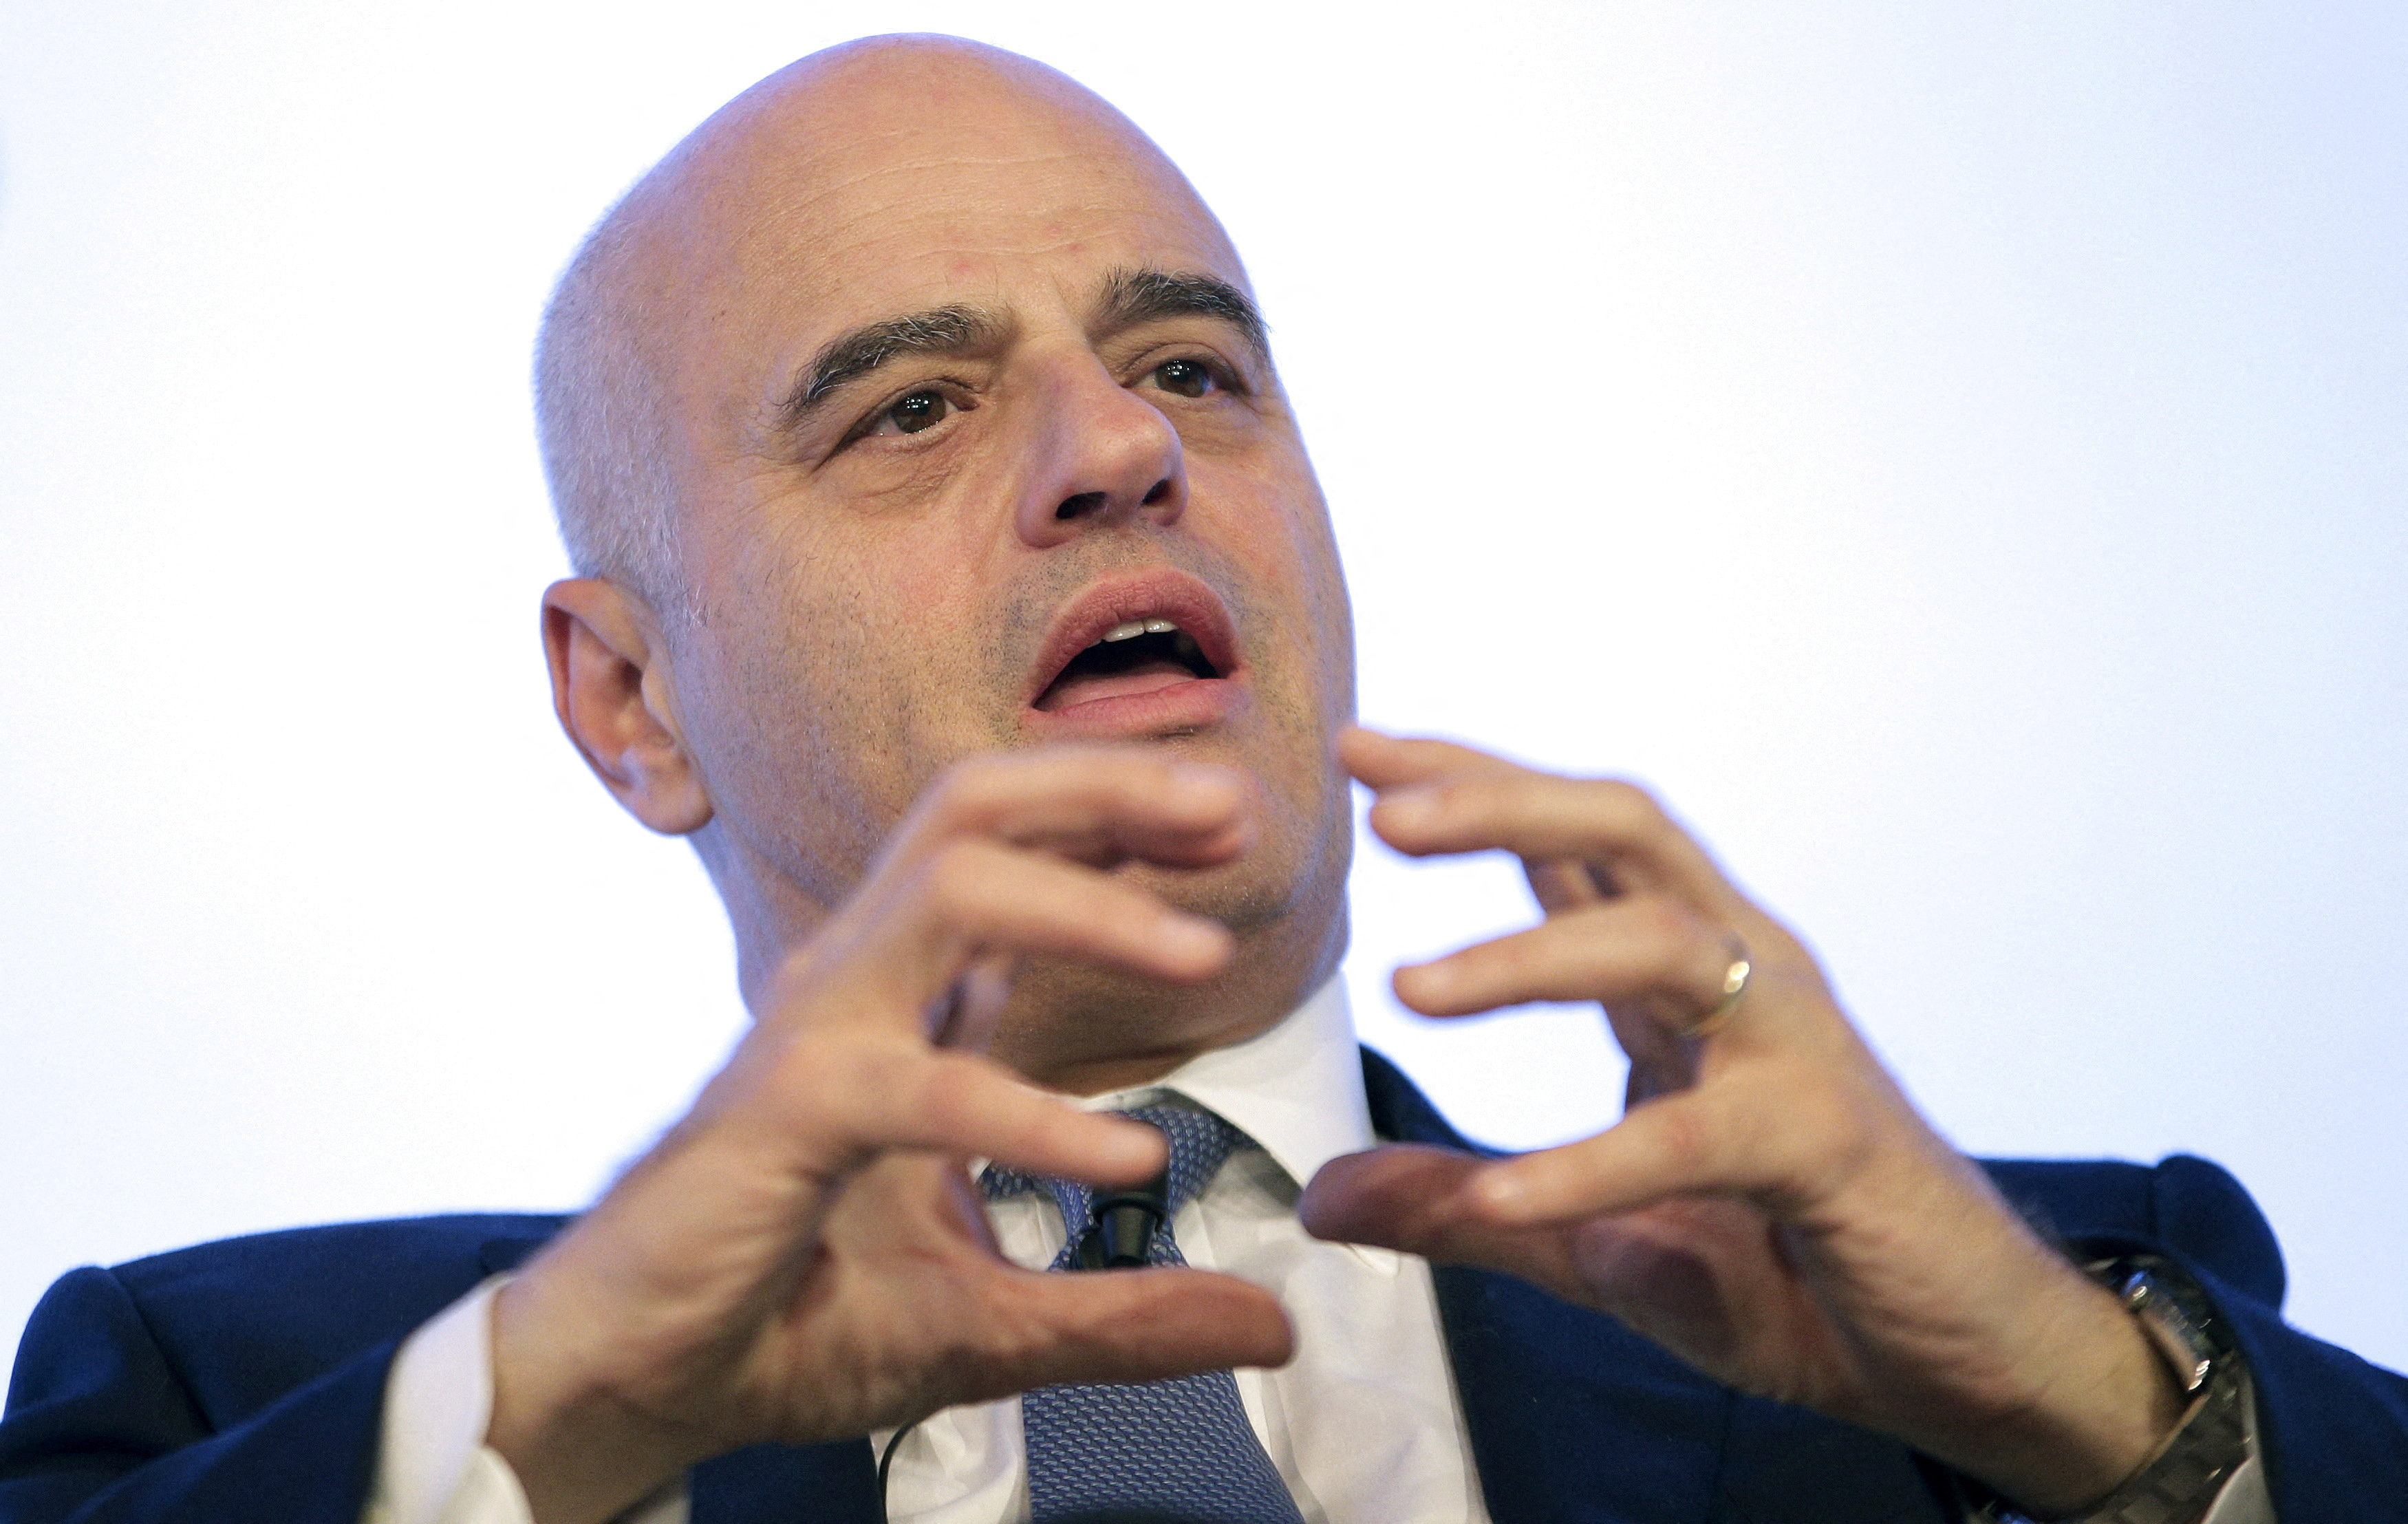 Eni CEO Descalzi speaks during the "Rome 2015 MED, Mediterranean dialogues" forum in Rome